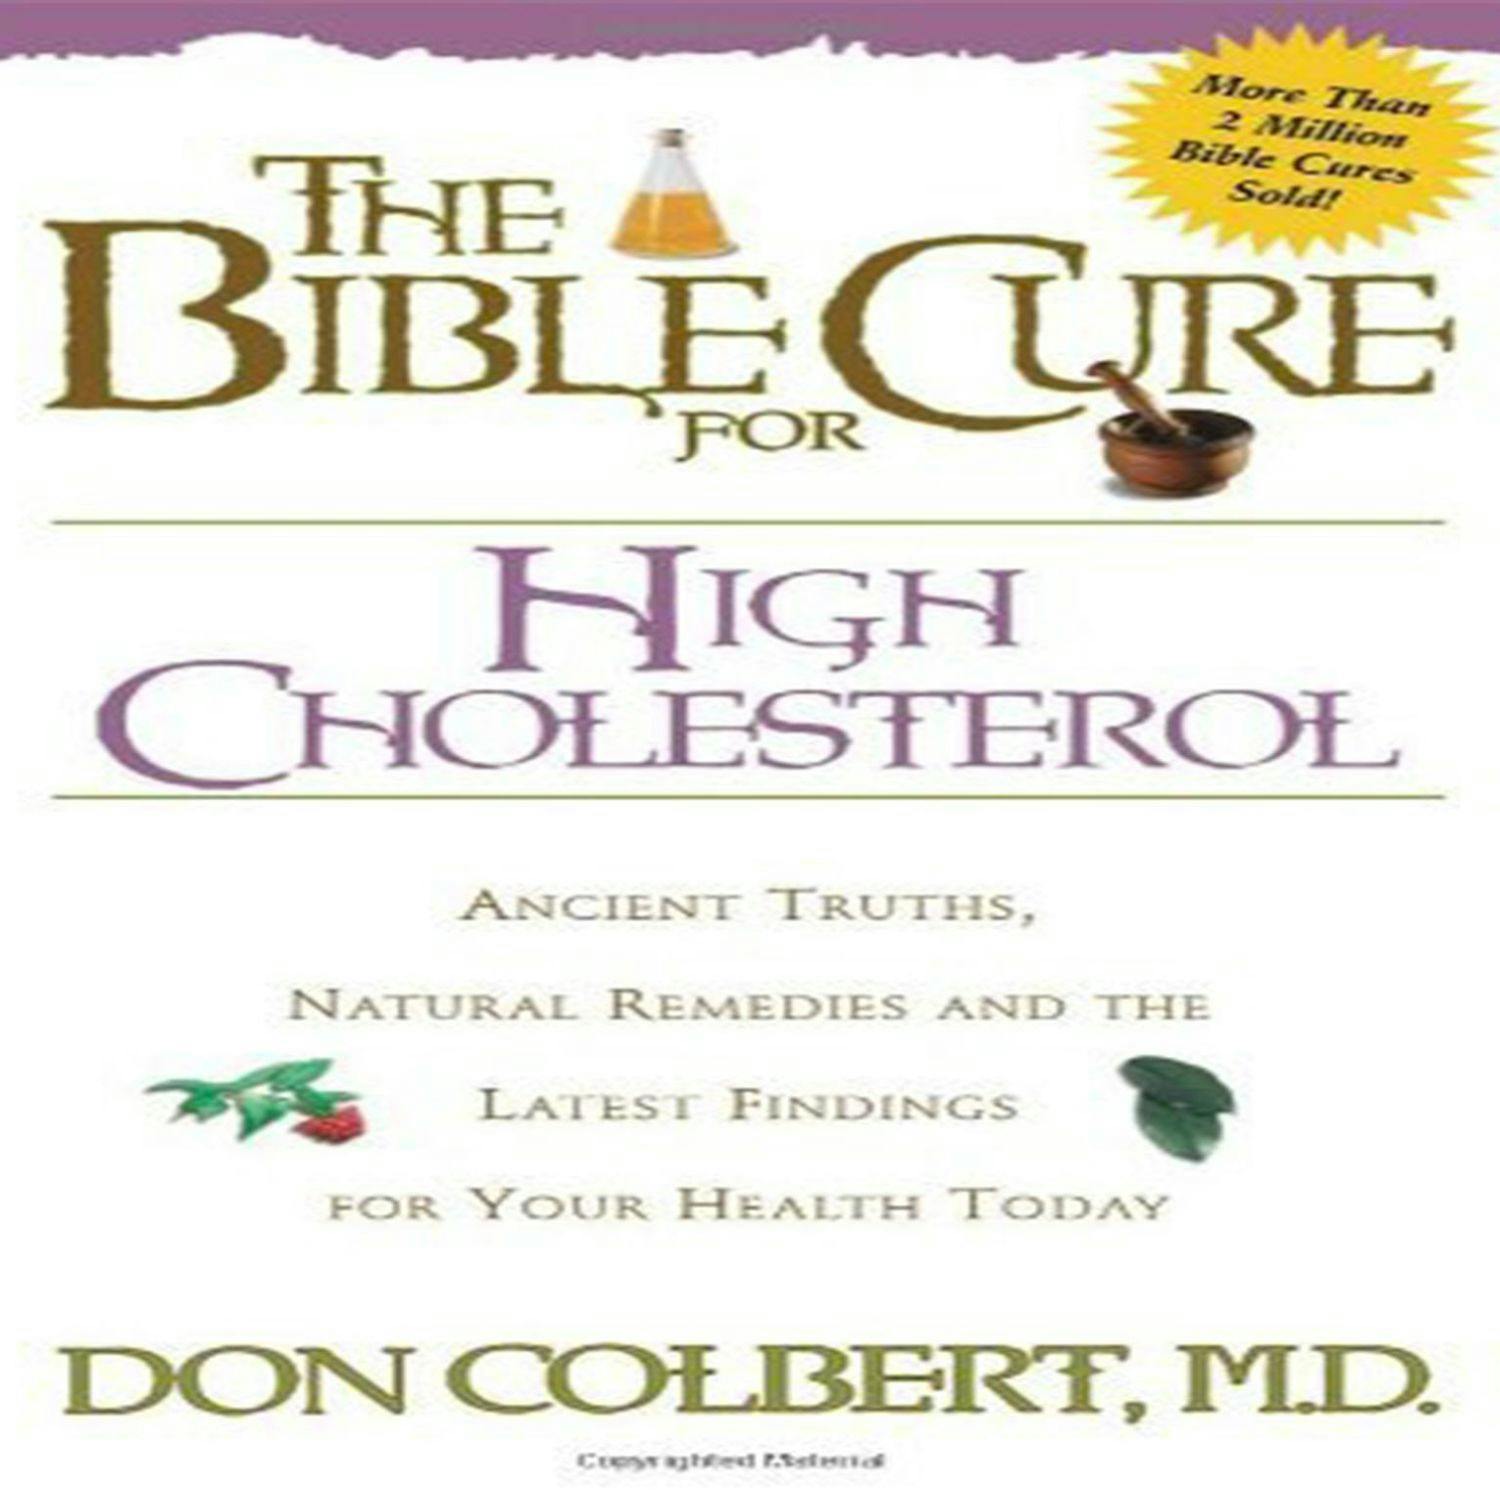 The Bible Cure for High Cholesterol: Ancient Truths, Natural Remedies, and the Latest Findings for Your Health Today - undefined